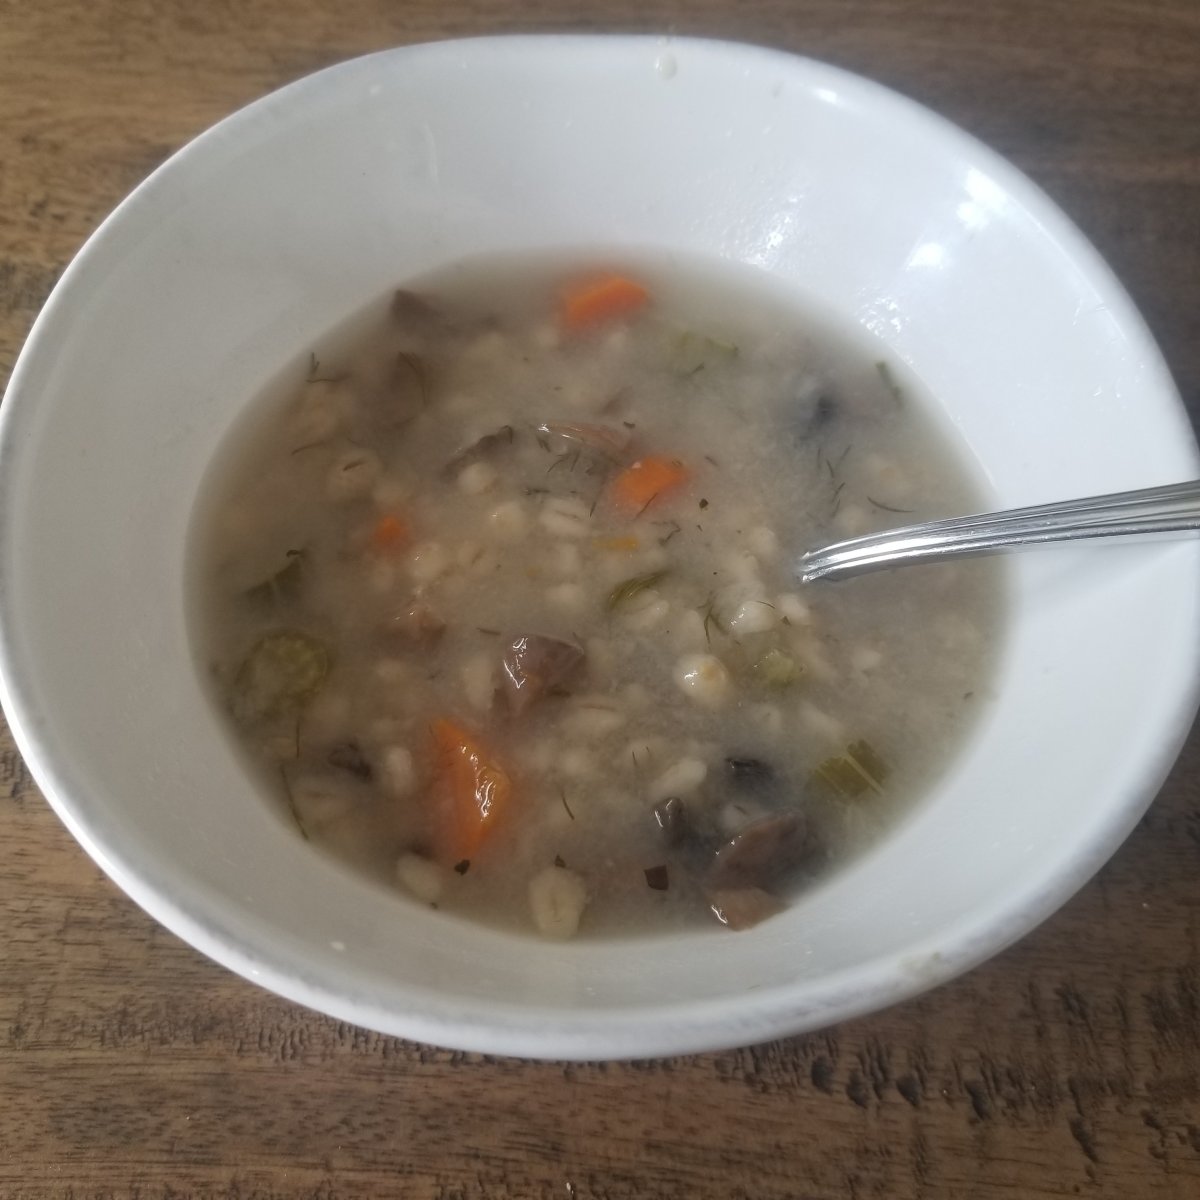 https://images.saymedia-content.com/.image/t_share/MTc1ODE3NzA4NTYwOTgzOTI5/simple-and-delicious-mushroom-barley-soup.jpg